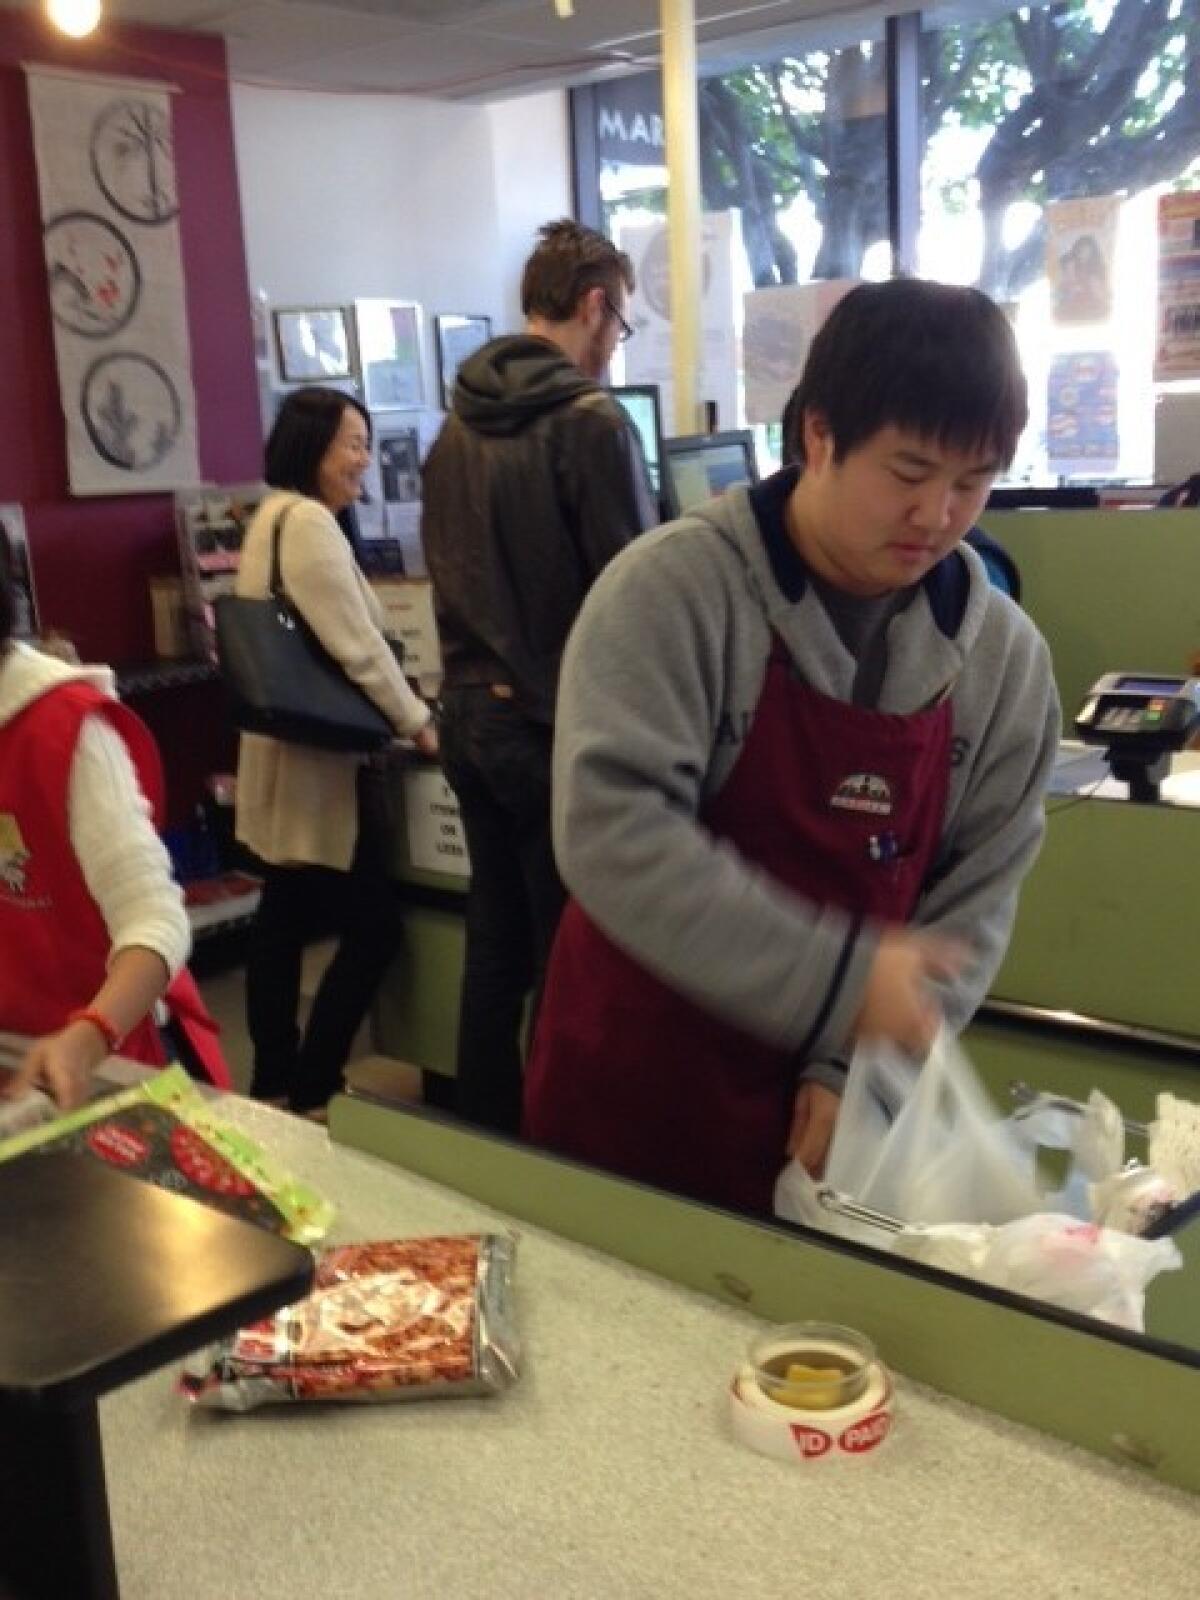 Nicholas Ogino bags groceries at Marukai Market in Little Tokyo, which is posting signs about the coming change.